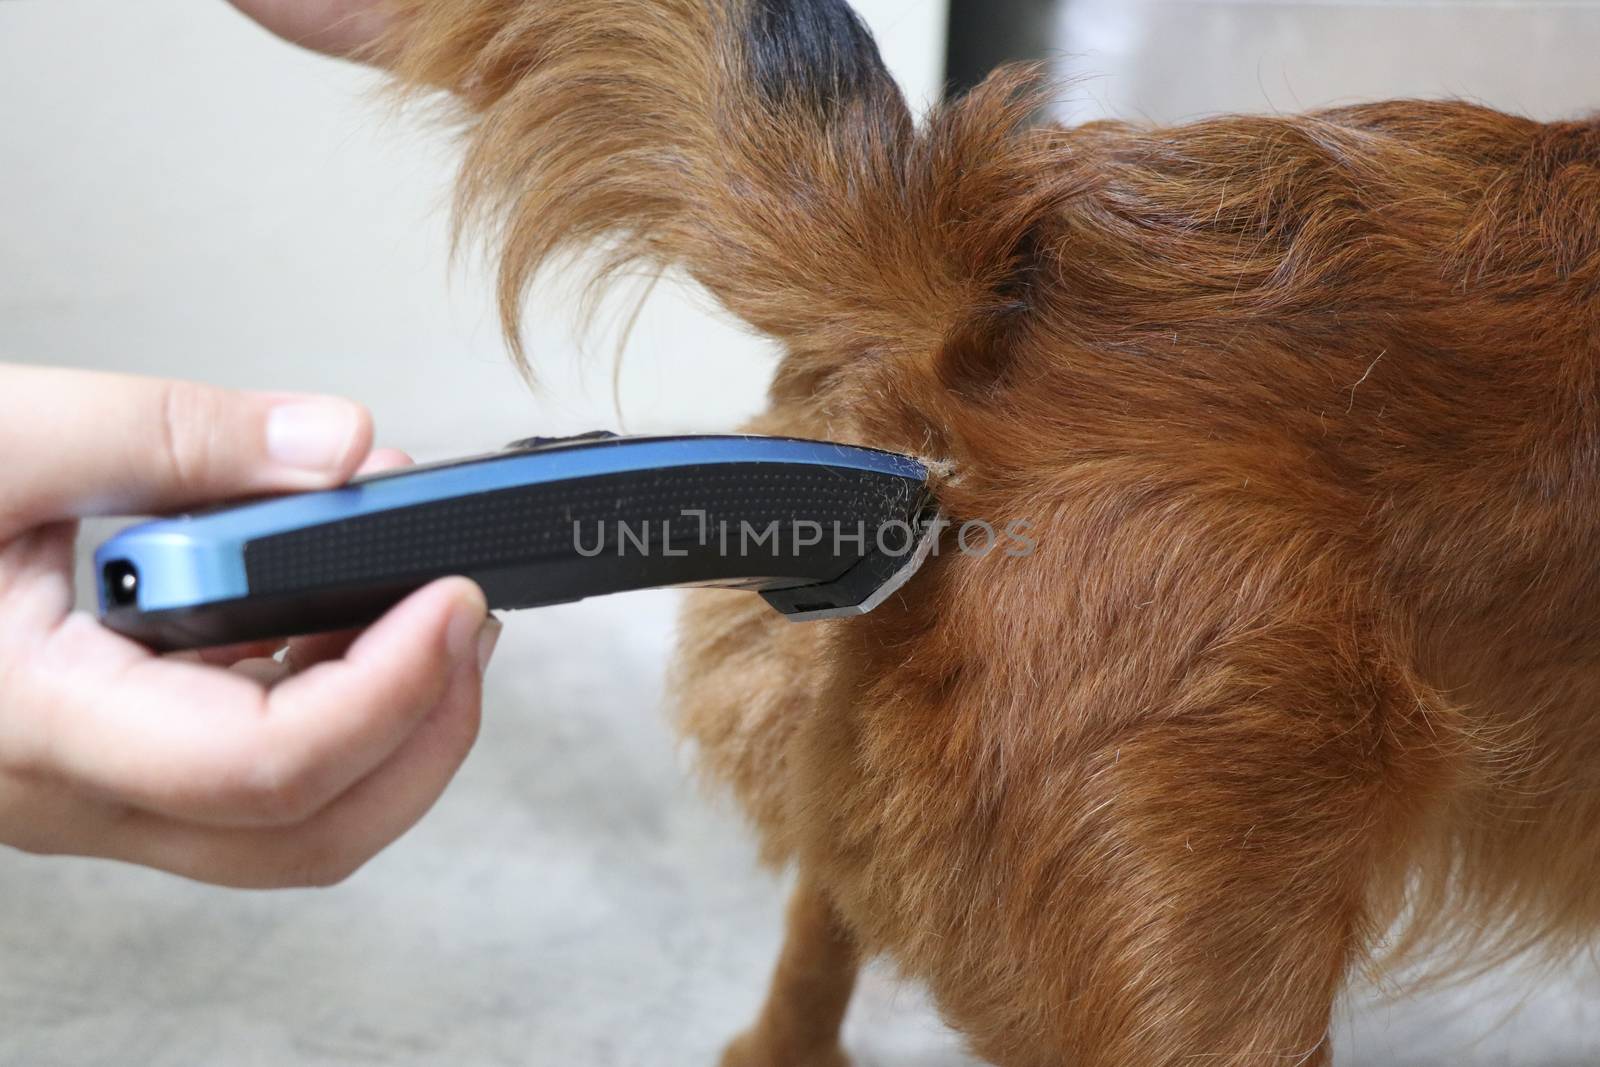 Trim the fur on the bottom of the Chihuahua dog for cleanliness and hygiene. The veterinarian is cutting the fur on the bottom of the Chihuahua dog.